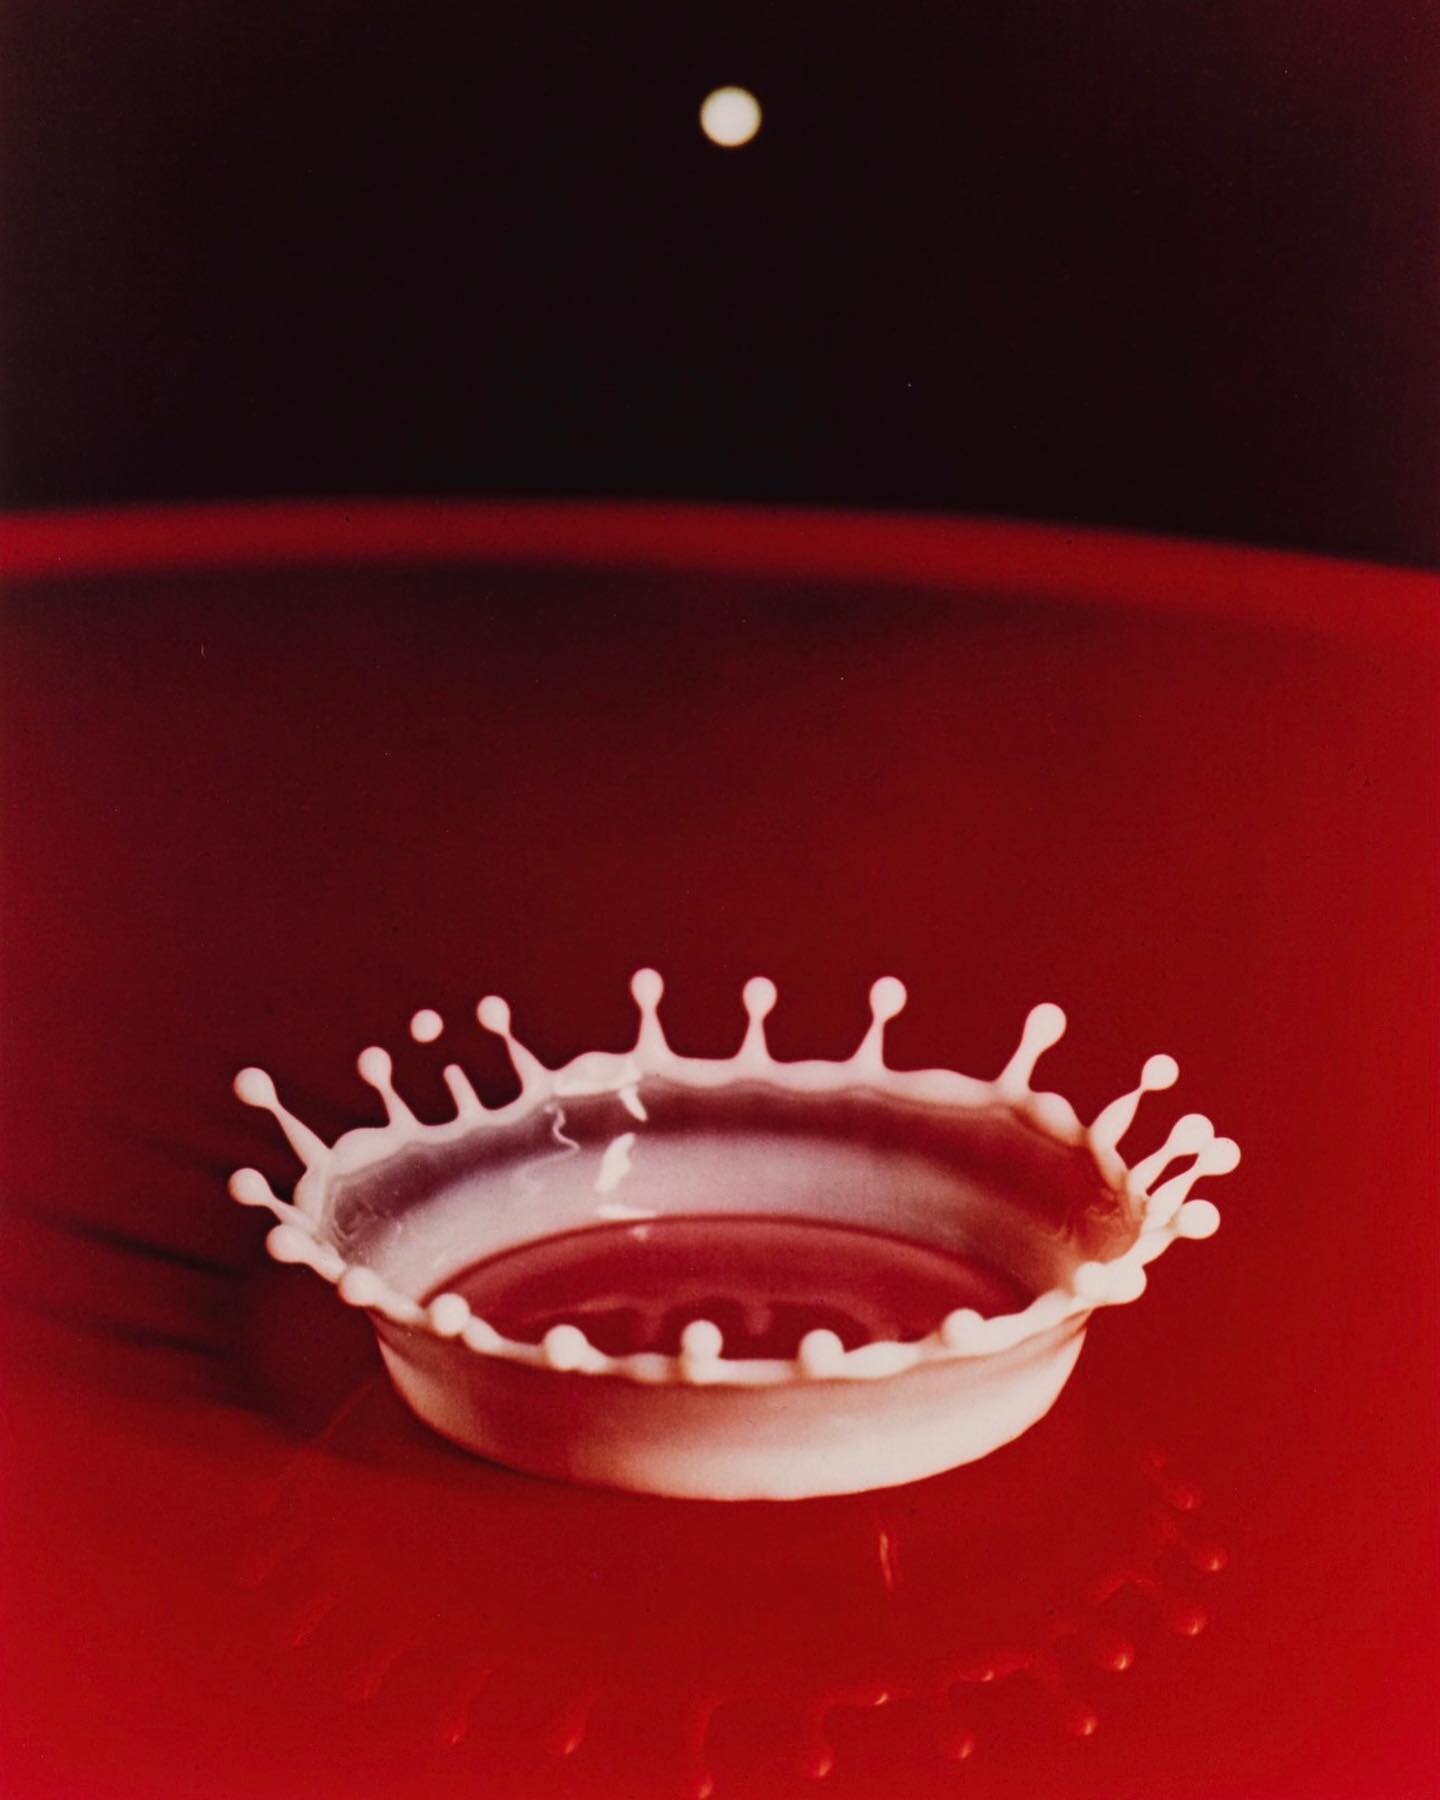 #fridaysales &ldquo;Milk Drop Coronet, 1957&rdquo; by Harold &ldquo;Doc&rdquo; Edgerton. The Council for the Arts at MIT awarded Edgerton the Eugene McDermott Award with this citation, &ldquo;We can instantly recall it: the drop of milk splashing aga